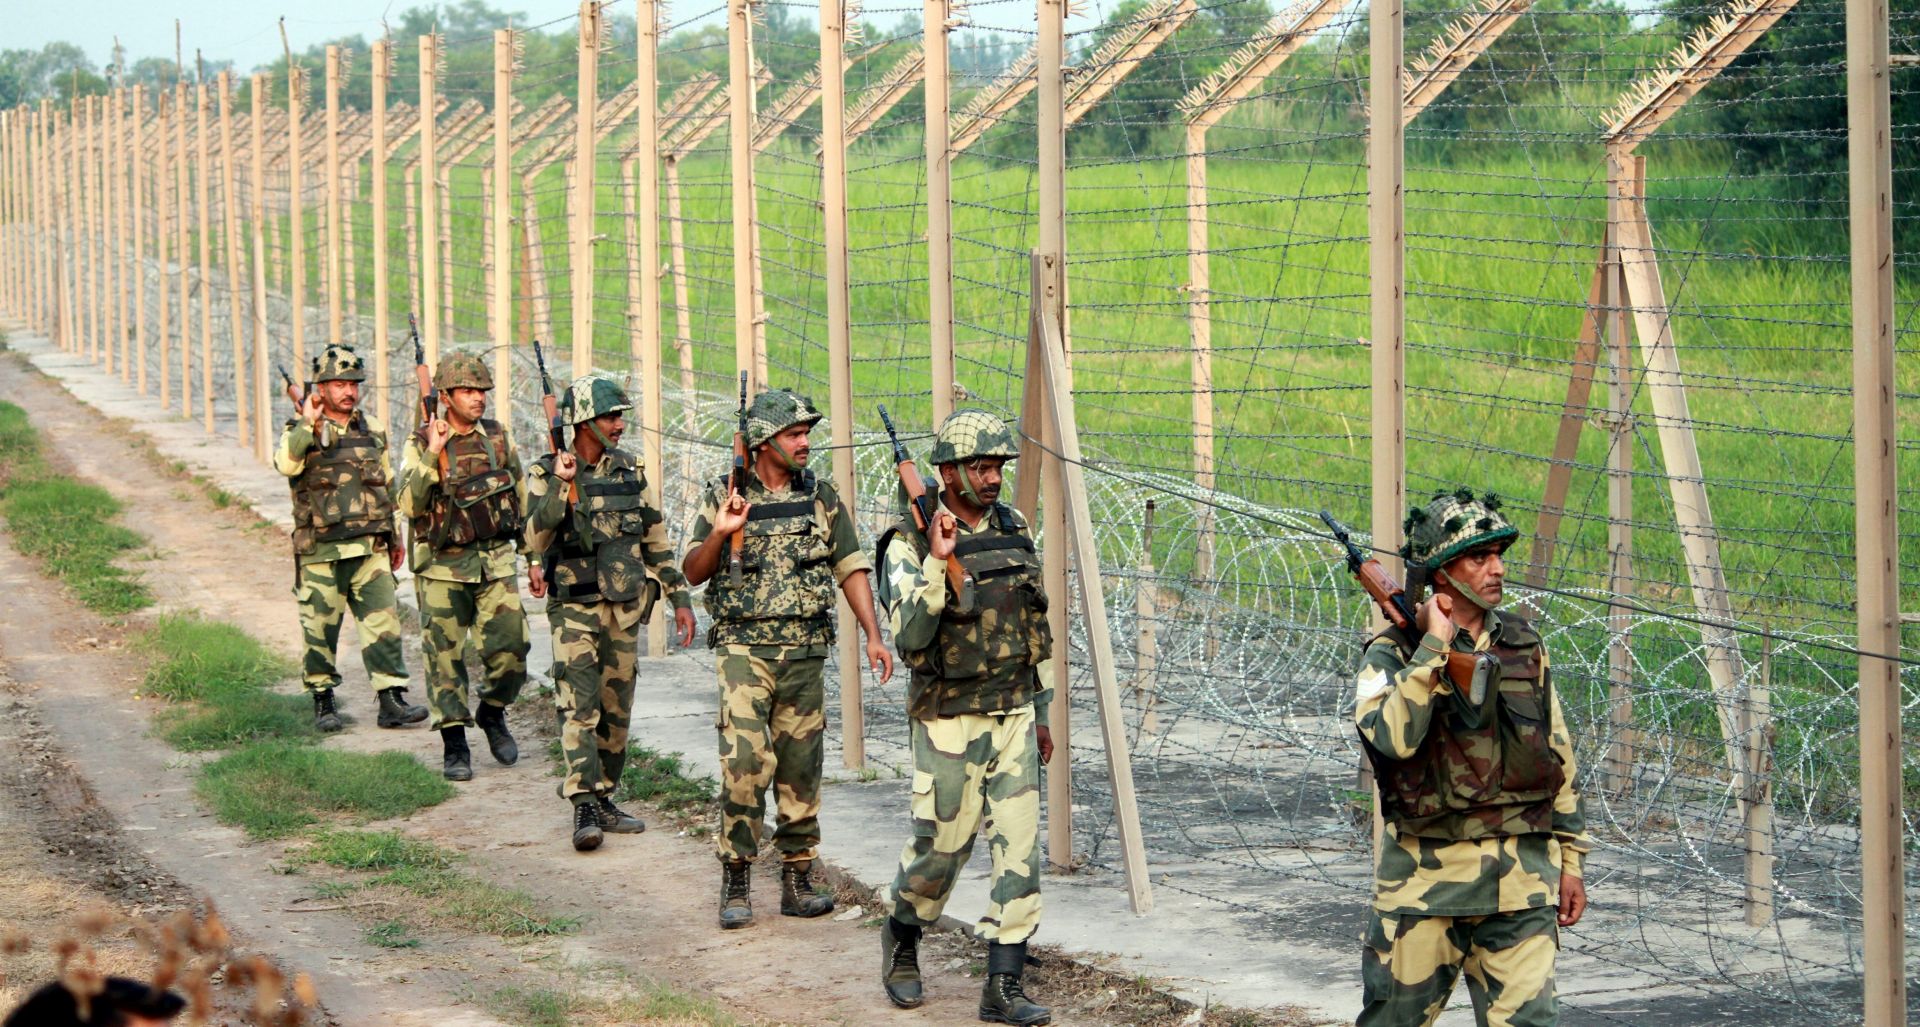 epa05483003 A picture made available on 14 August 2016 shows soldiers of the Indian Border Security Force (BSF) patrolling near the fence at the India-Pakistan International Border at Dayoli post of Akhnoor sector, about 45 km from Jammu, the winter capital of Kashmir, India, 13 August 2016. Security has been beefed up ahead of the upcoming India's Independence Day on 15 August as authorities raised alert all over the country.  EPA/JAIPAL SINGH